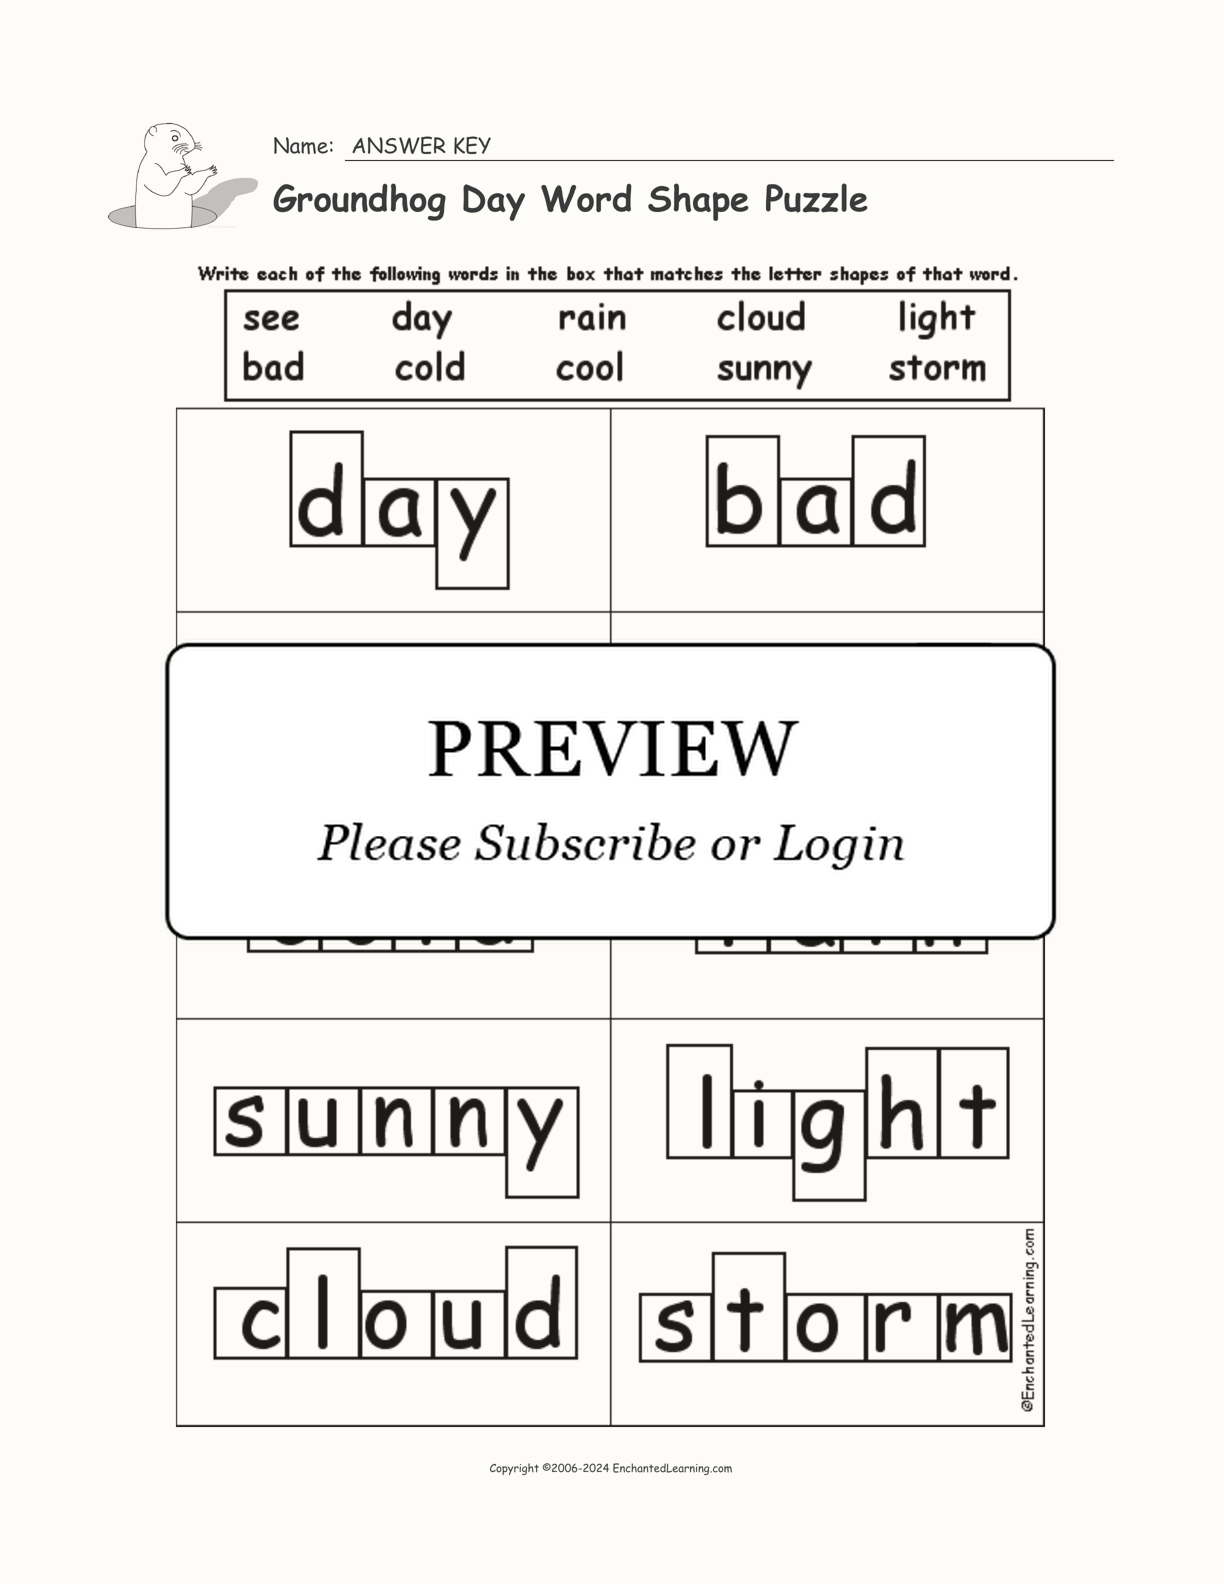 Groundhog Day Word Shape Puzzle interactive worksheet page 2